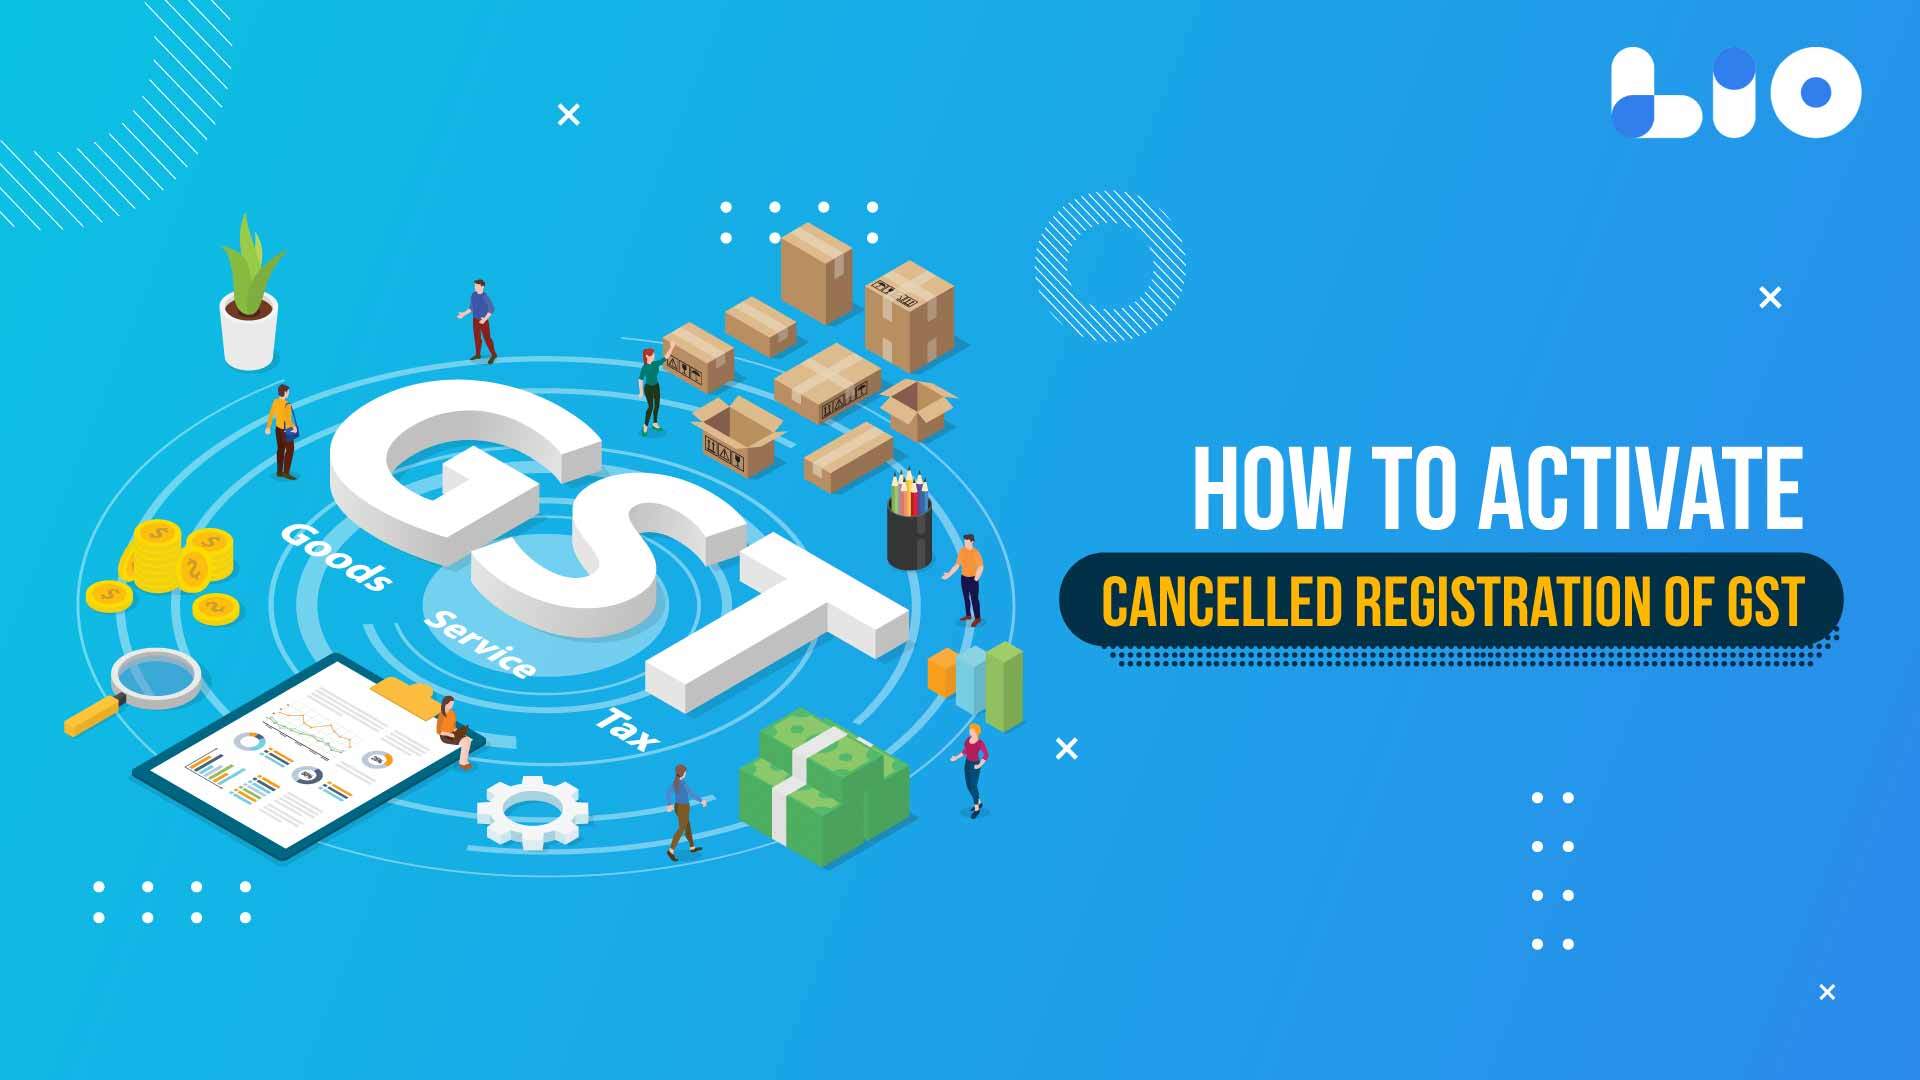 How To Activate Cancelled Registration Of GST?